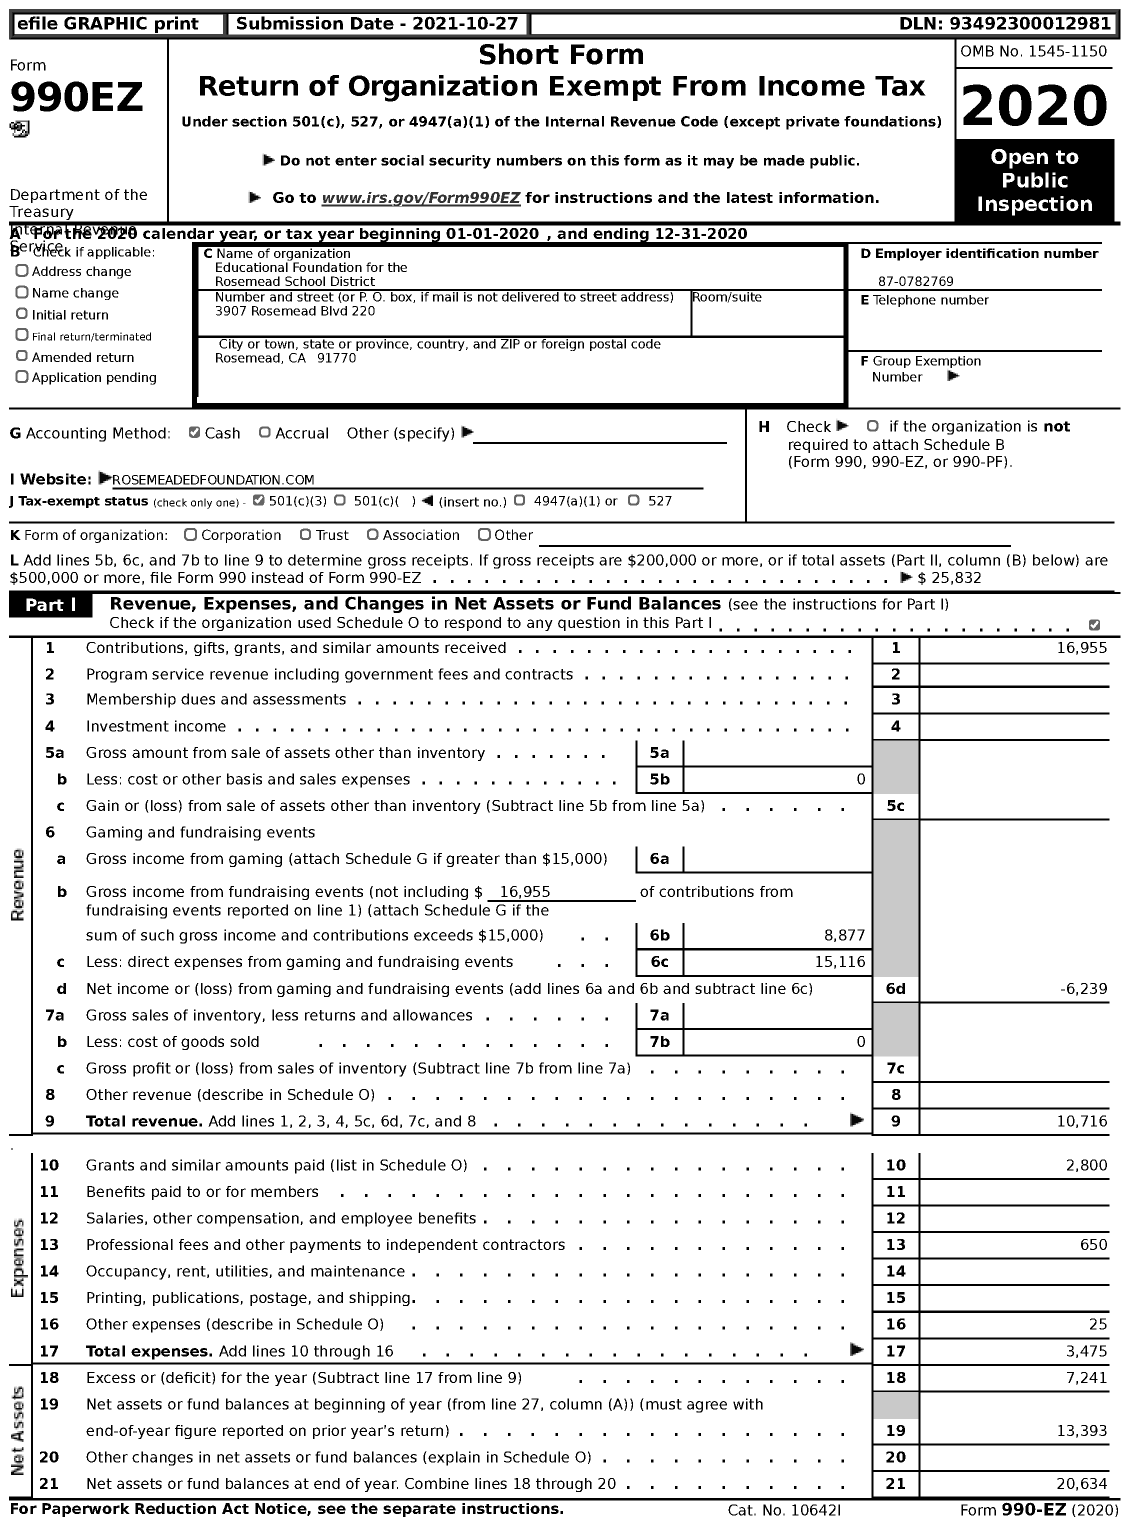 Image of first page of 2020 Form 990EZ for Educational Foundation for the Rosemead School District